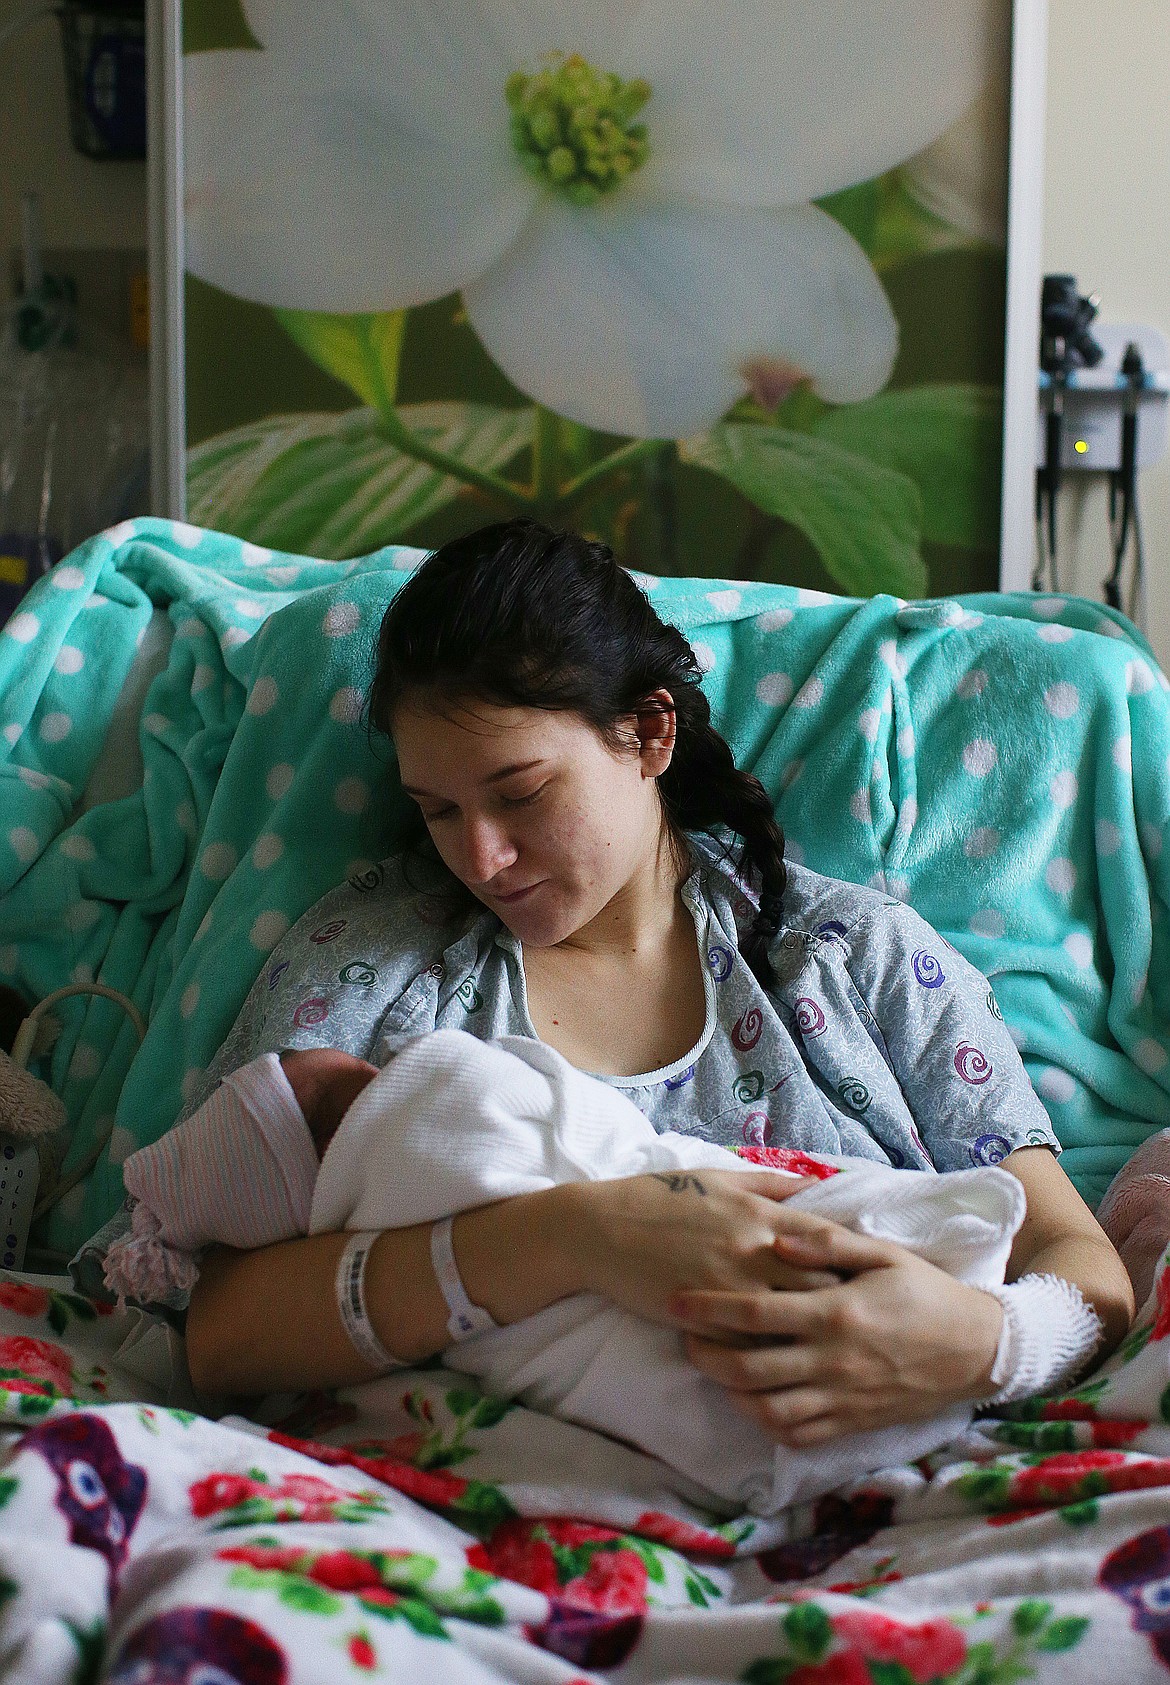 Katlynn Rene&#146;e Taylor, 19, holds her newborn baby, Jeriah James Taylor at Kootenai Health. Jeriah was Born at 9:02 a.m. New Years Day and weighed in at 7 lbs., 13 oz, and measured 20.5 in. long. (LOREN BENOIT/Press)